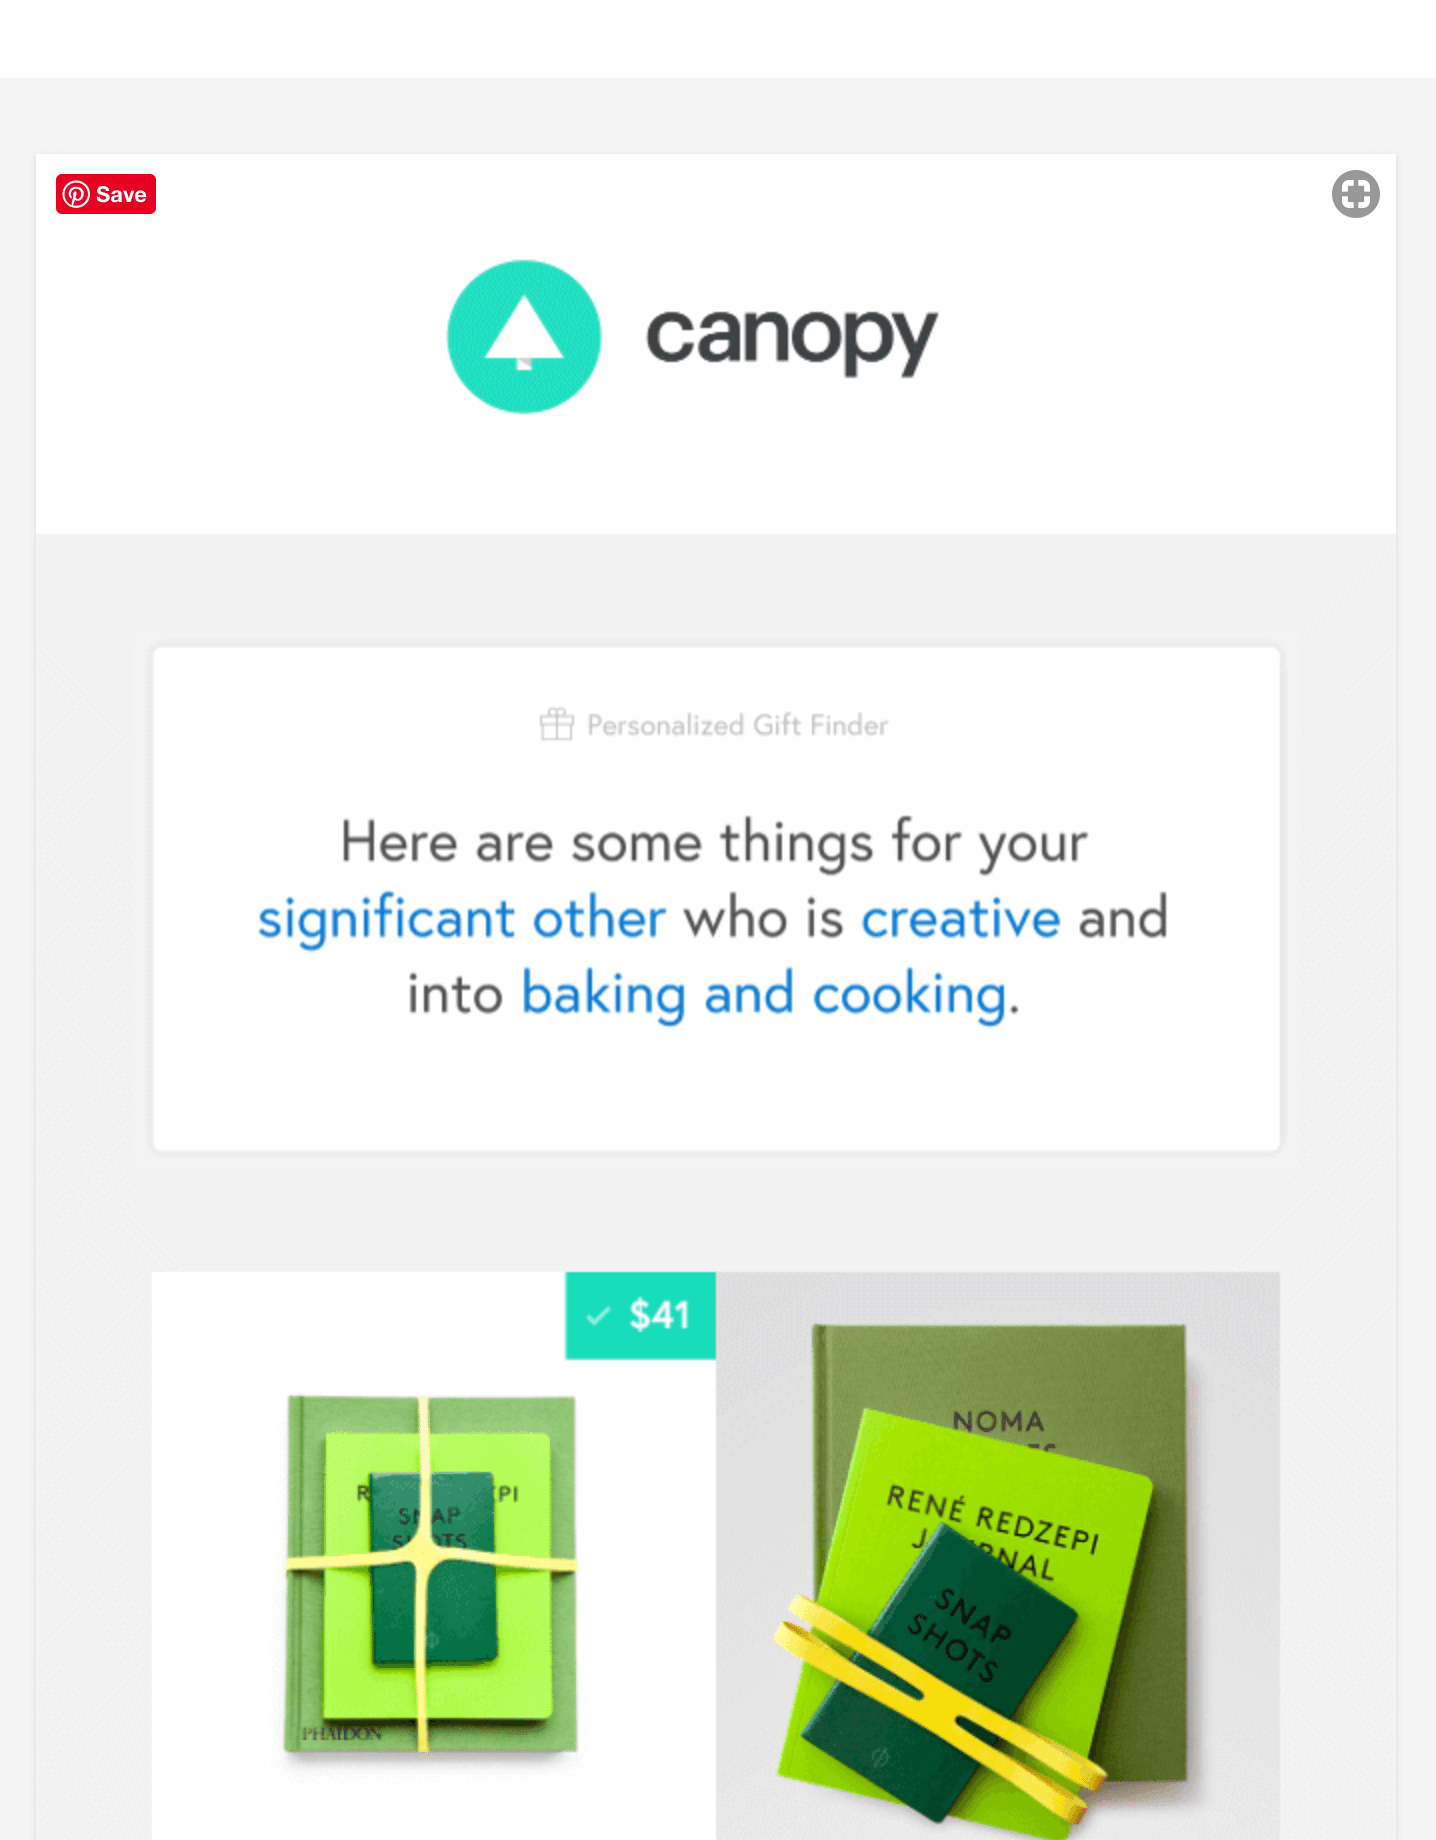 See how Canopy provides personalized and relevant content to their subscribers, helping them find the perfect gift